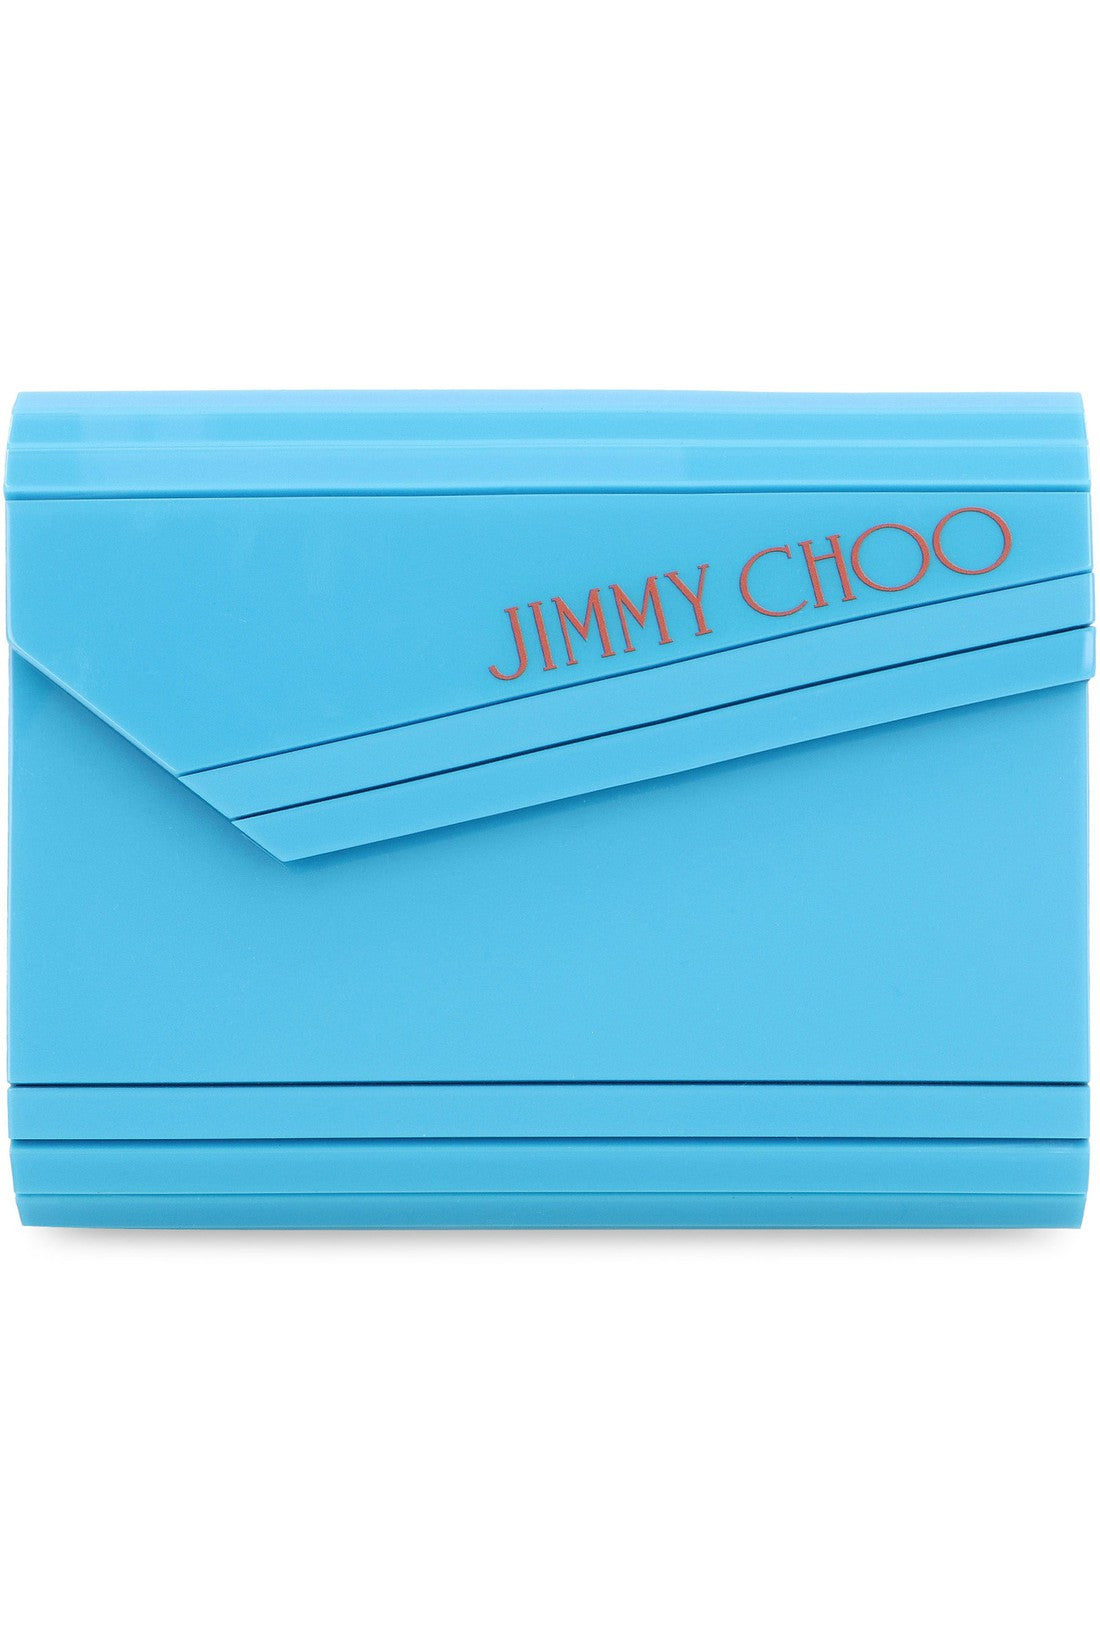 Jimmy Choo-OUTLET-SALE-Candy Clutch-ARCHIVIST